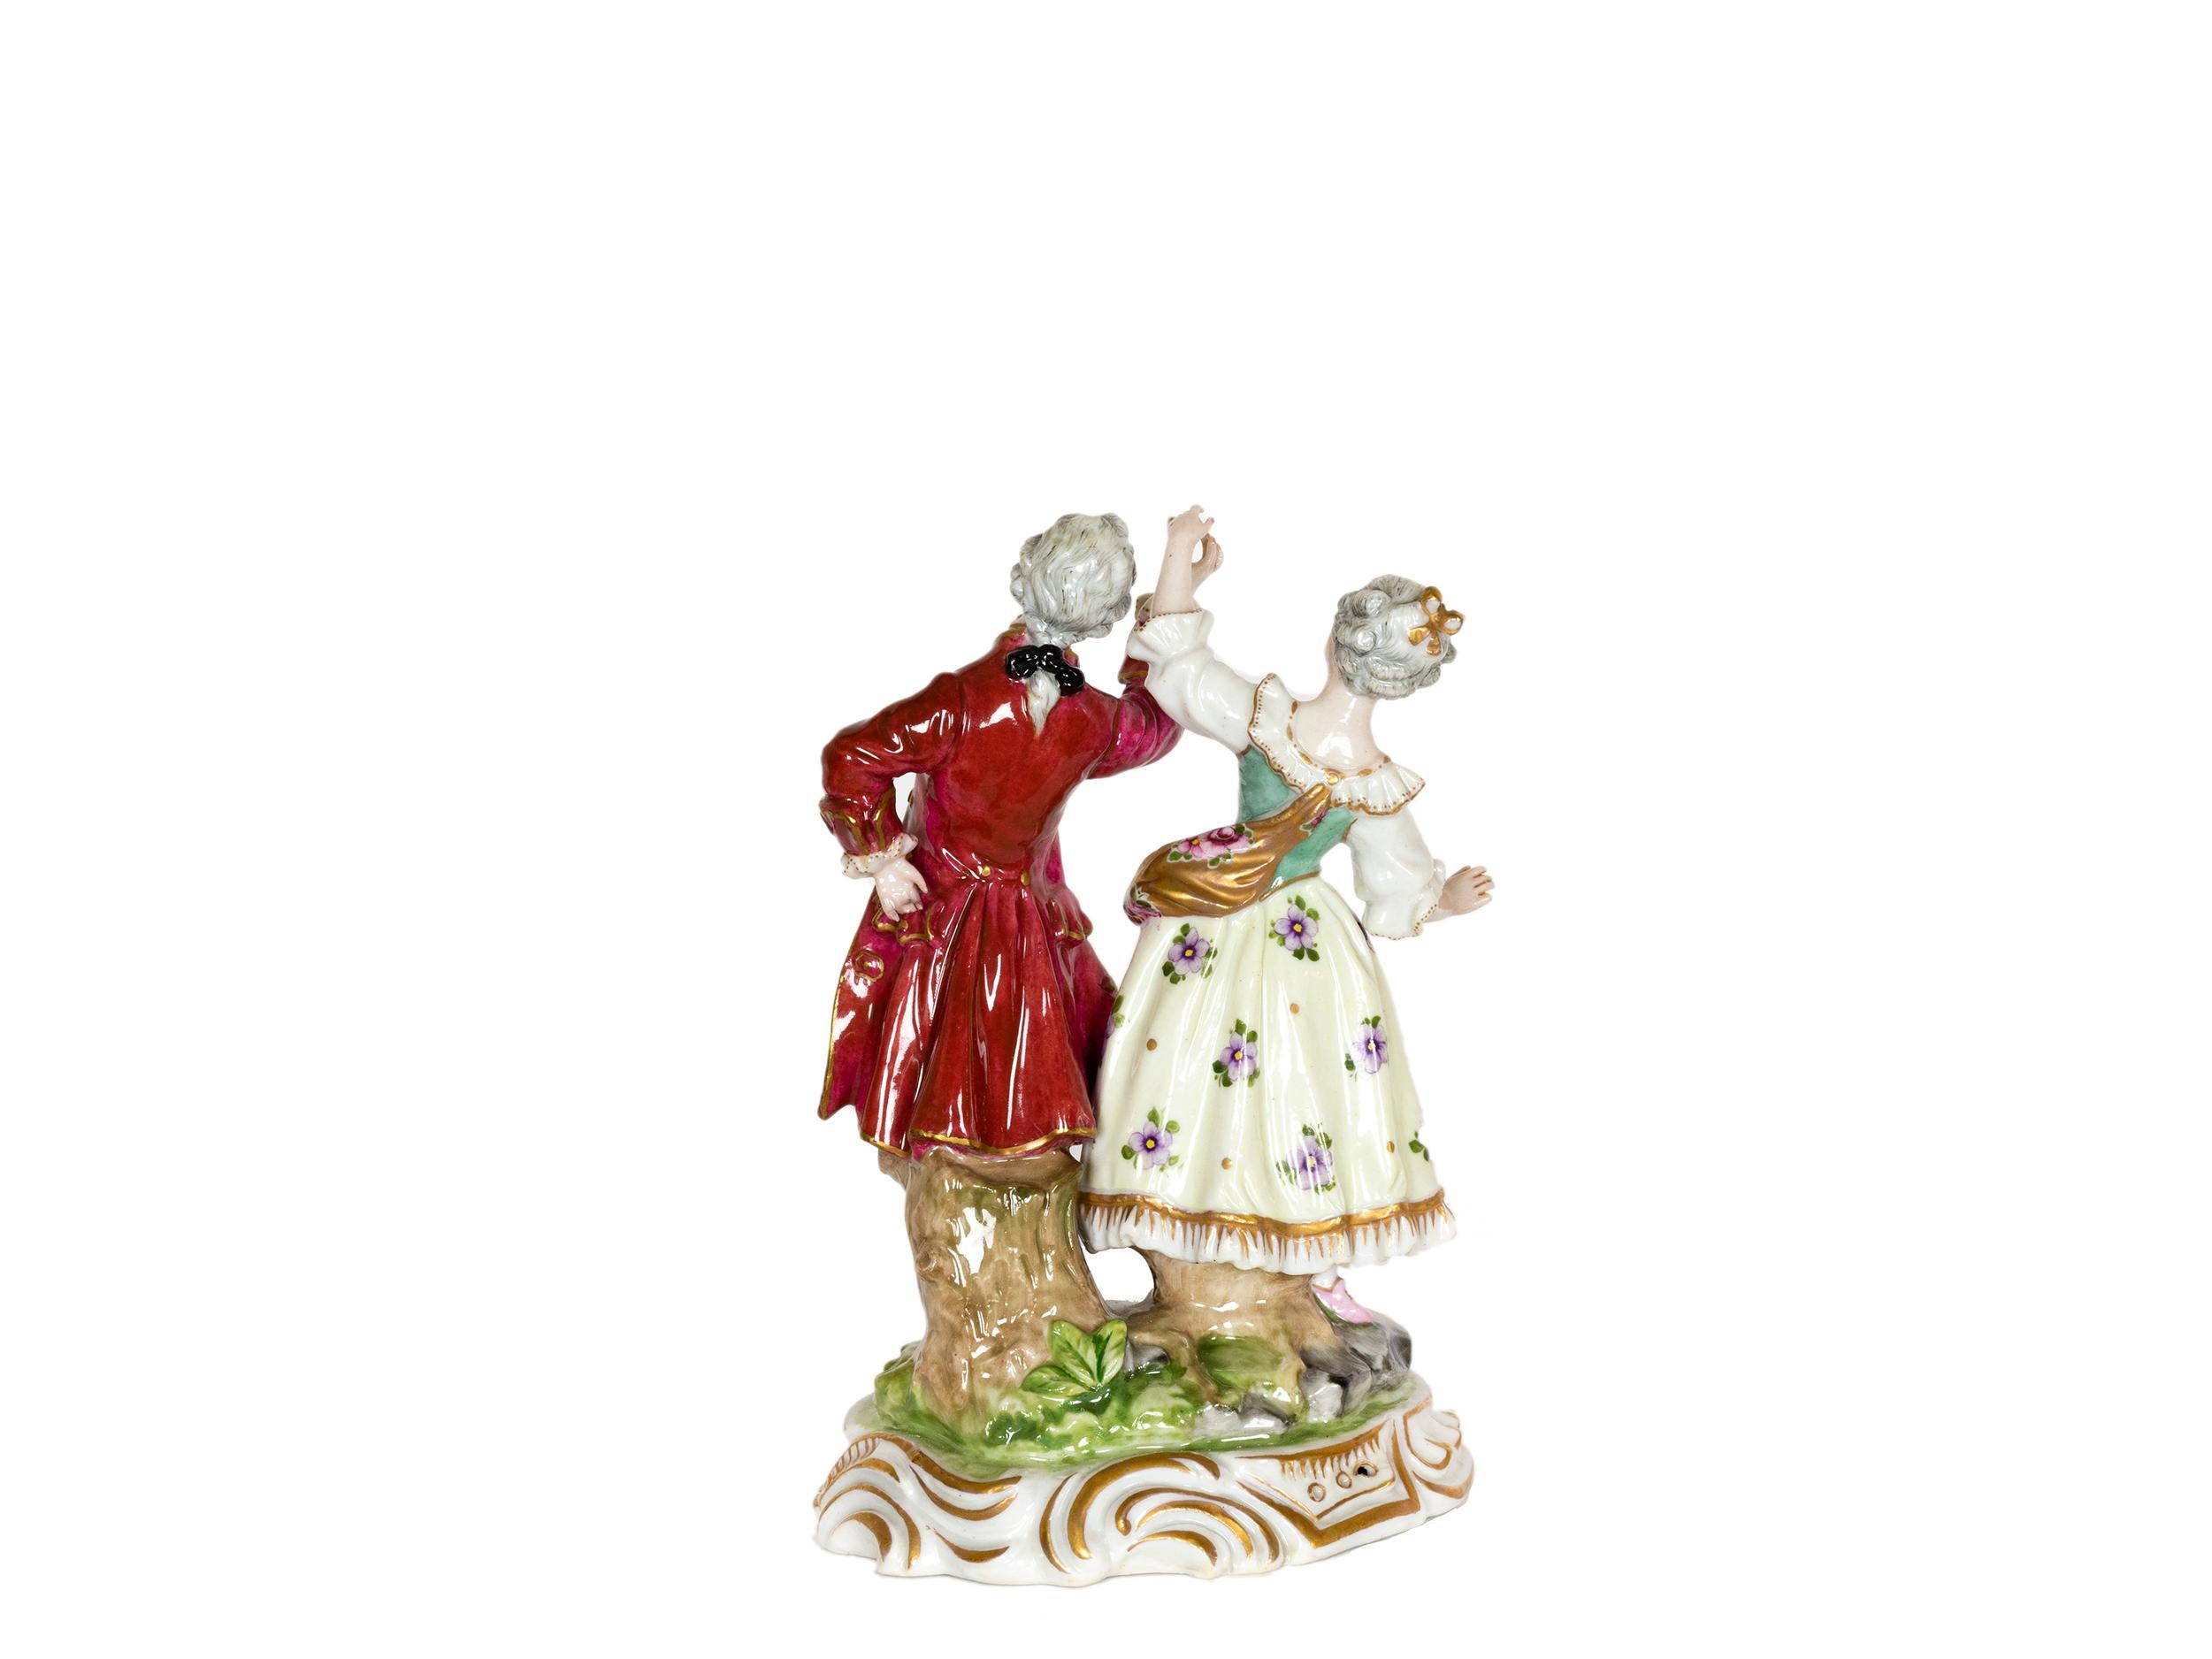 Baroque 18th Century Porcelain dancing couple figurine by Volkstedt  For Sale